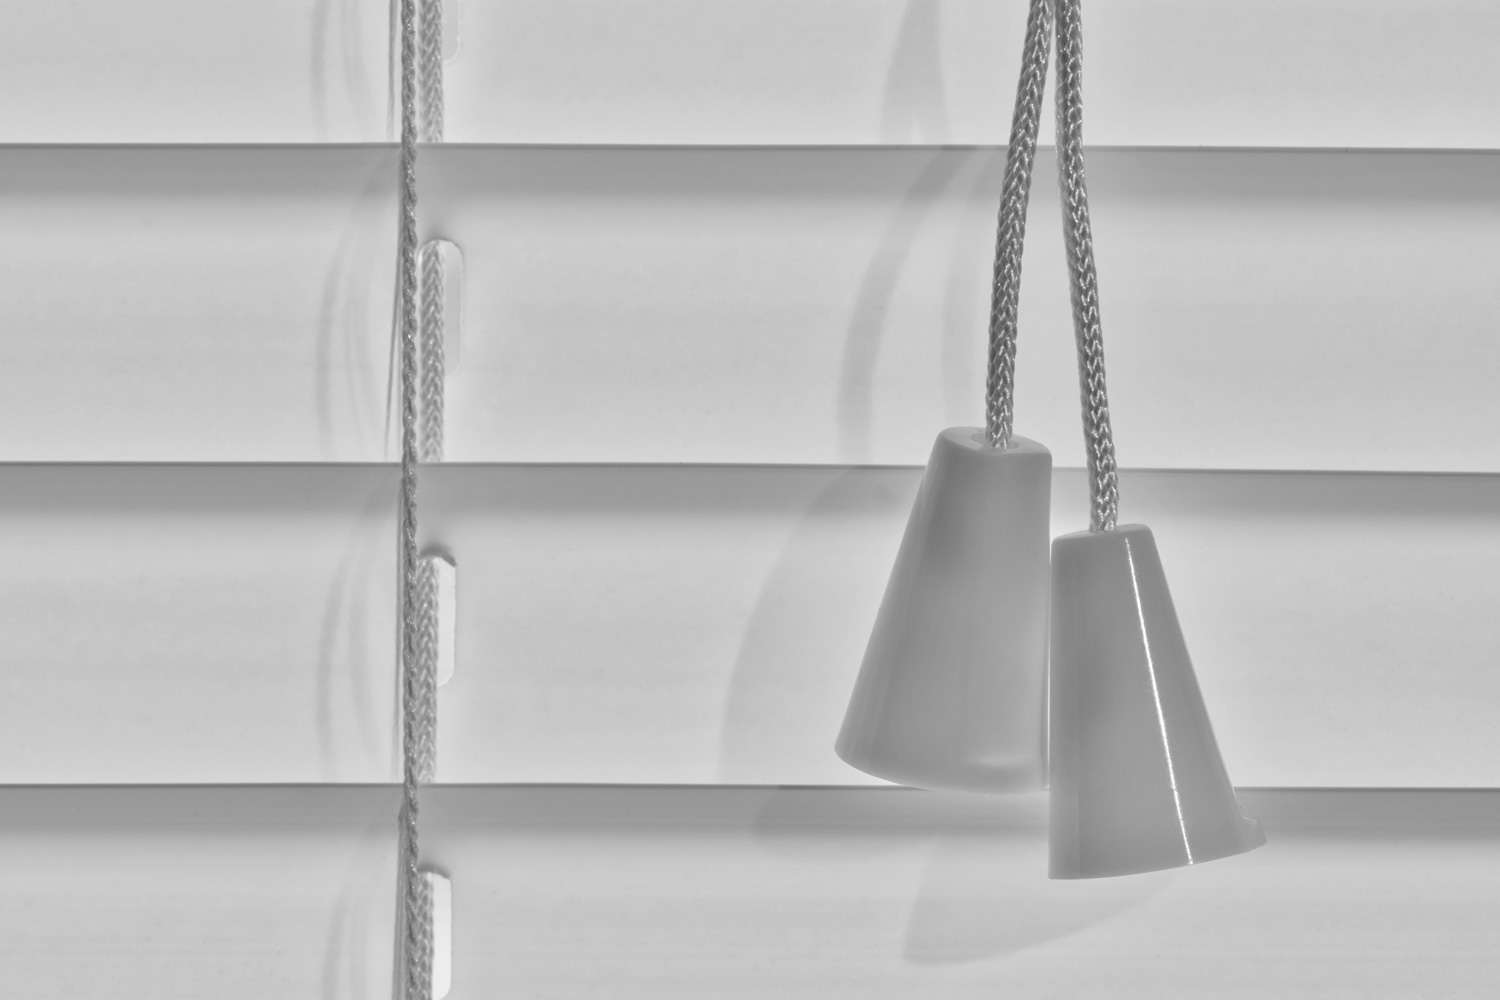 Black and white macro image of a closed Venetian blind segment showing pull cord tassels.